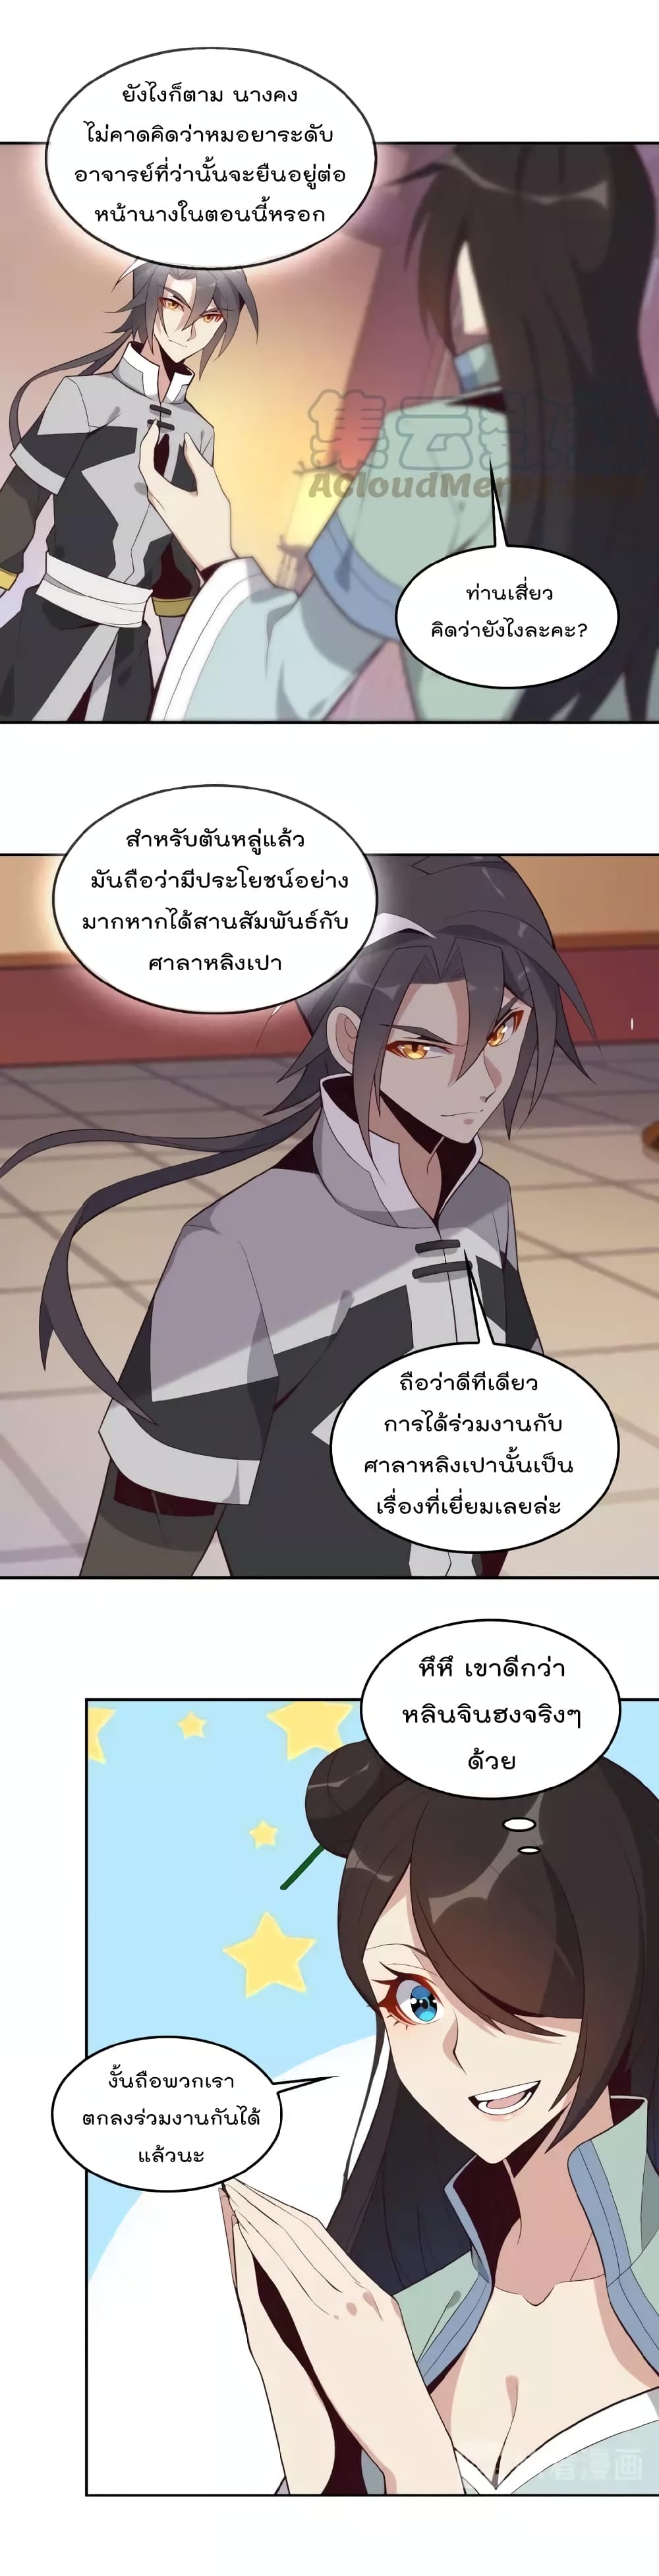 Swallow the Whole World ตอนที่18 (16)